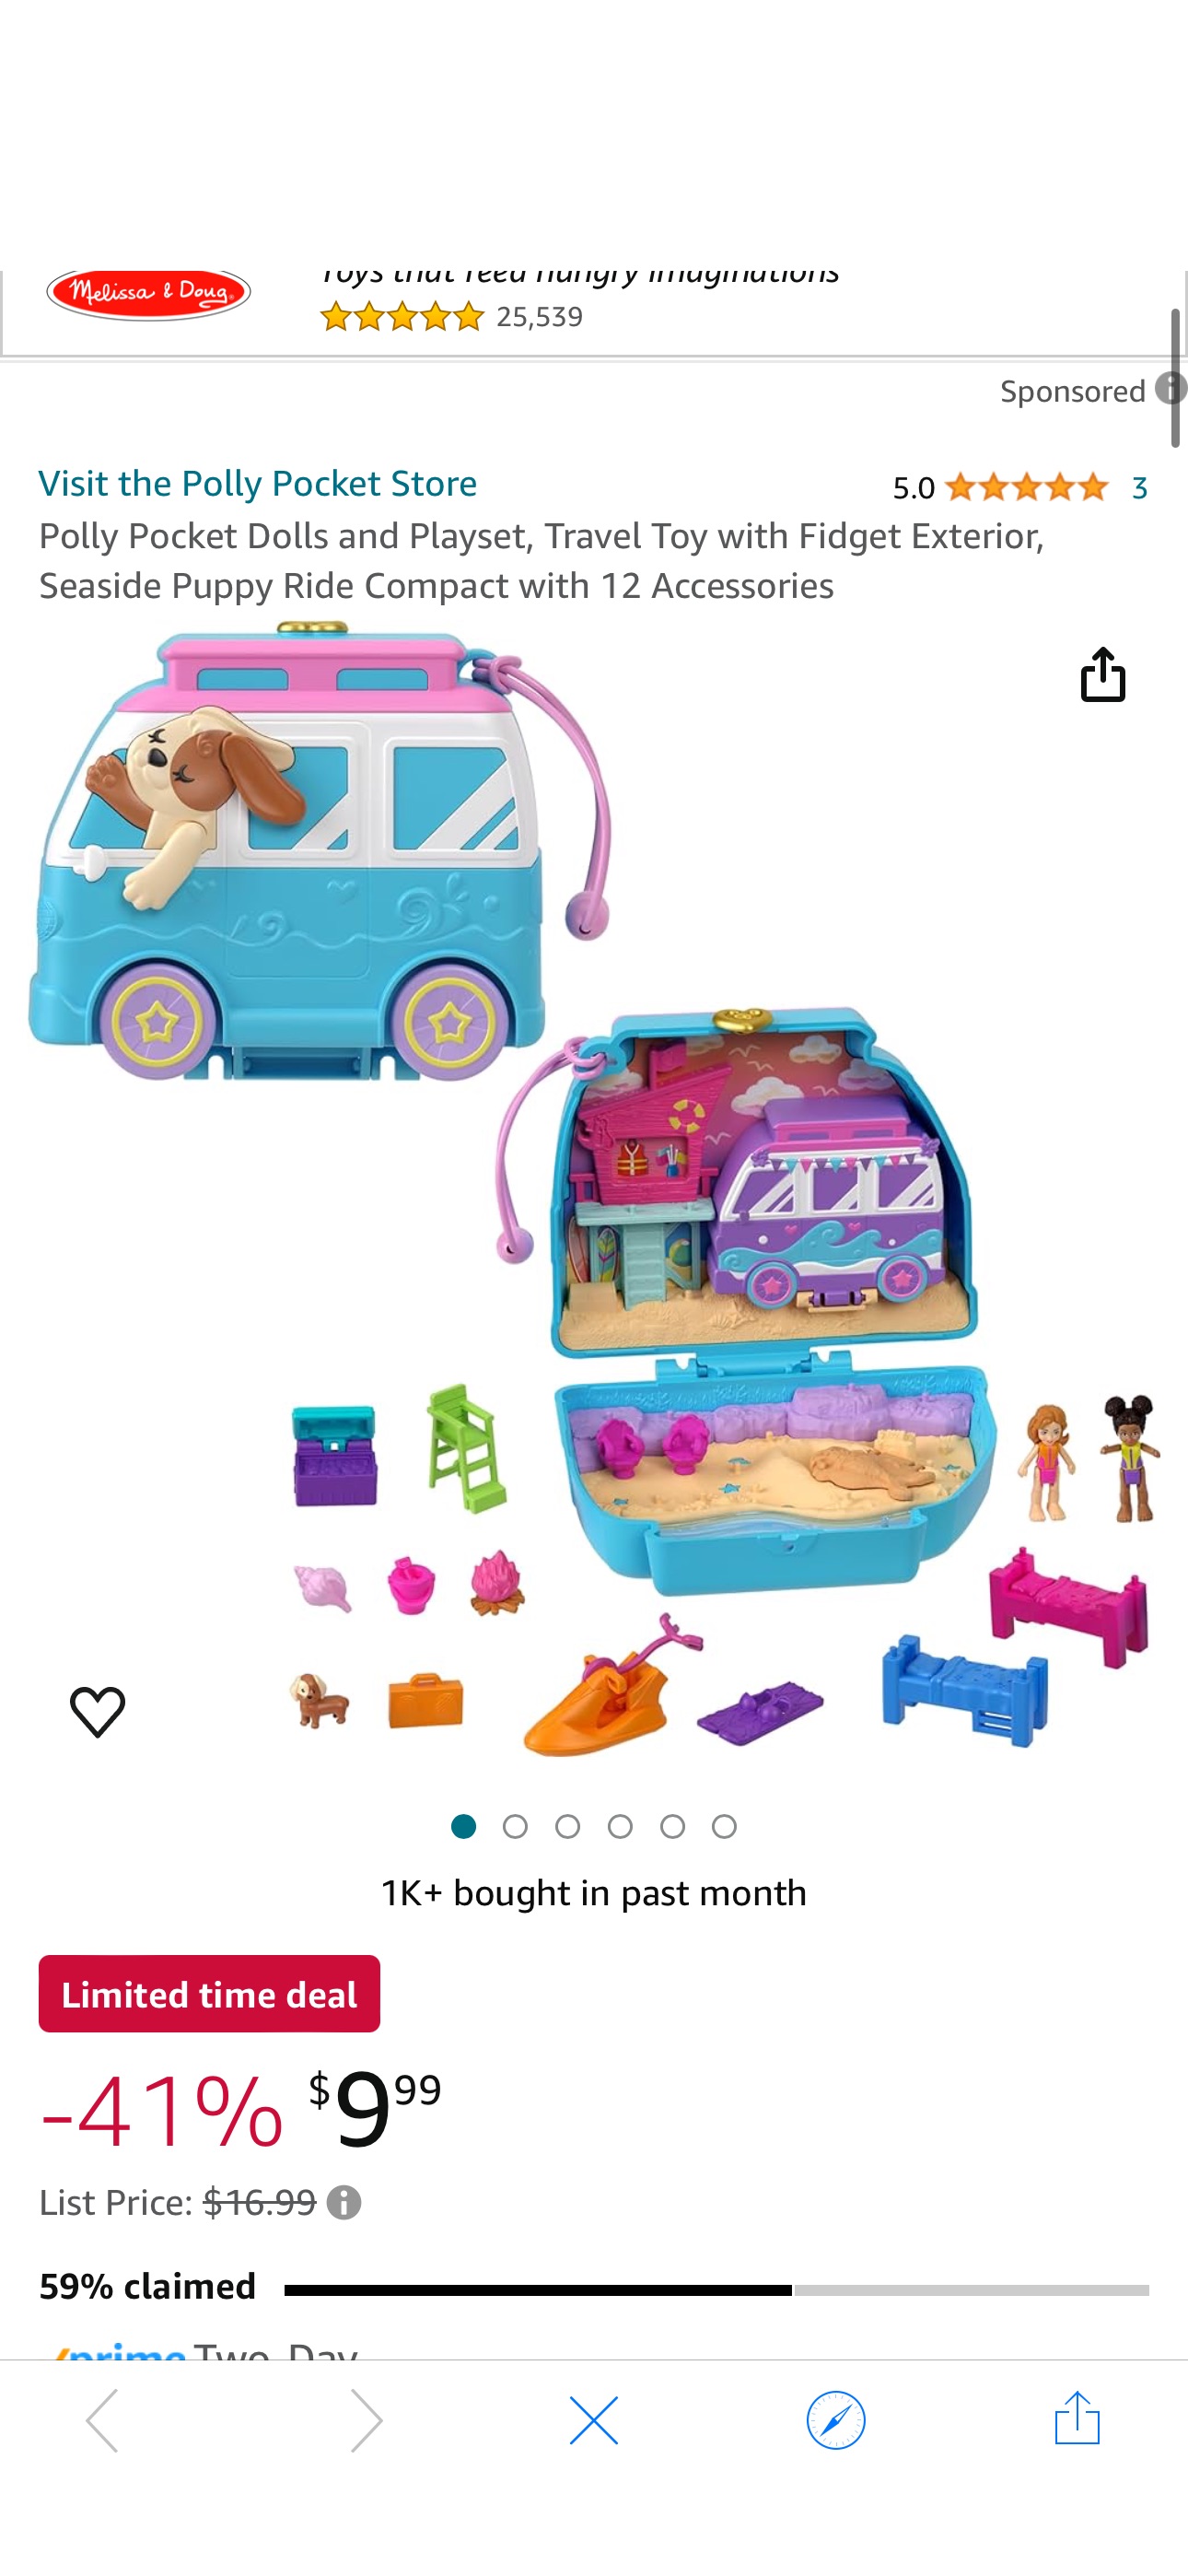 Amazon.com: Polly Pocket Dolls and Playset, Travel Toy with Fidget Exterior, Seaside Puppy Ride Compact with 12 Accessories : Toys & Games